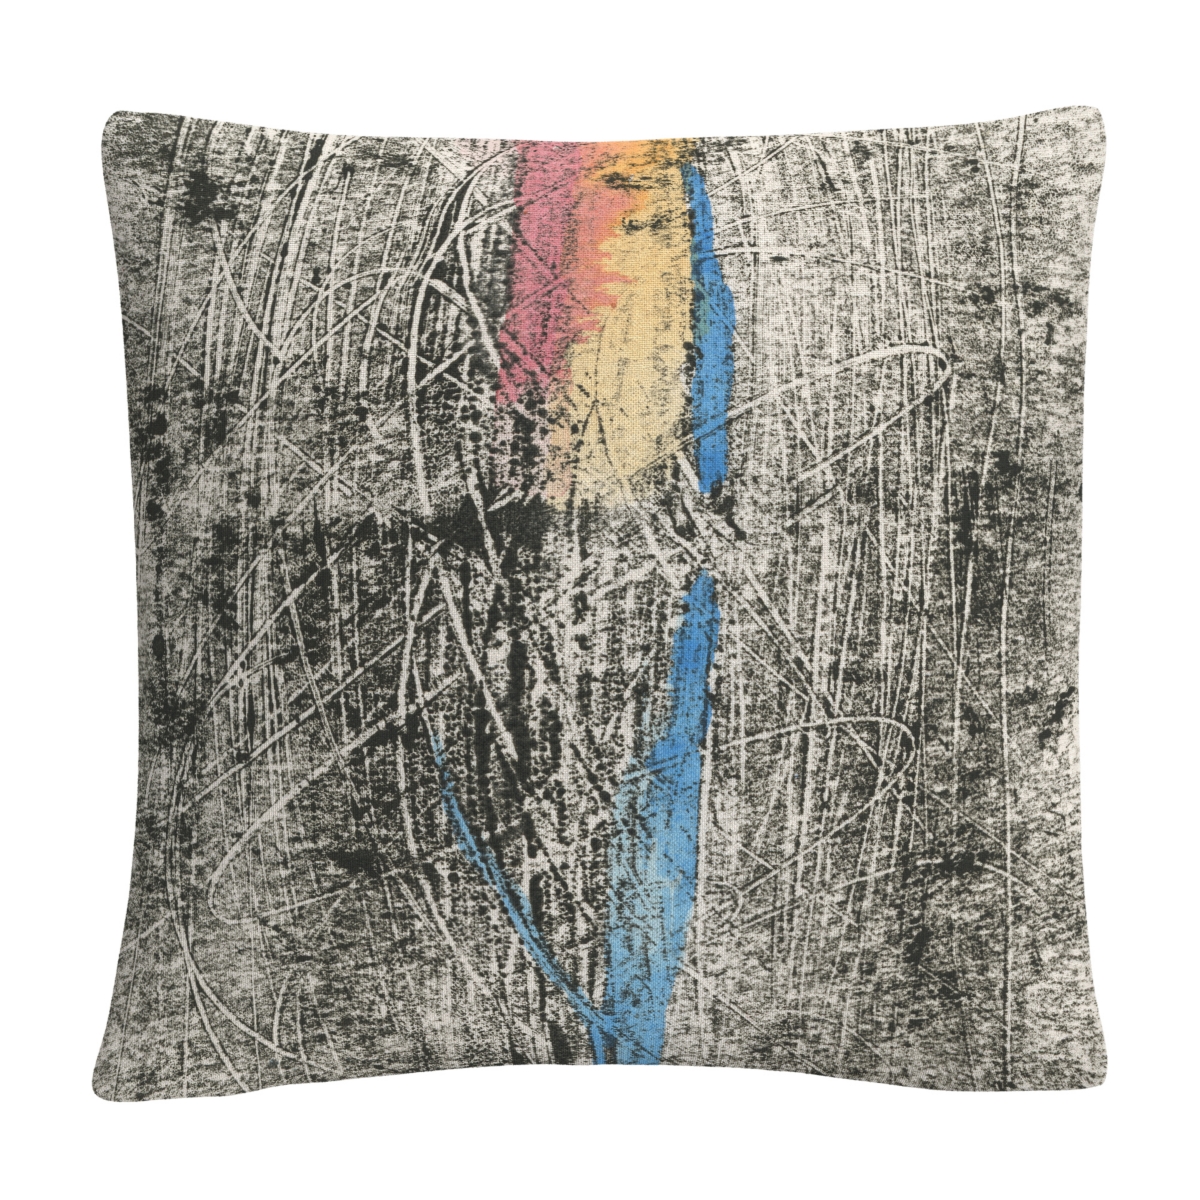 Anthony Sikich Flame on Black Colorful Shapes Line Composition Decorative Pillow, 16 x 16